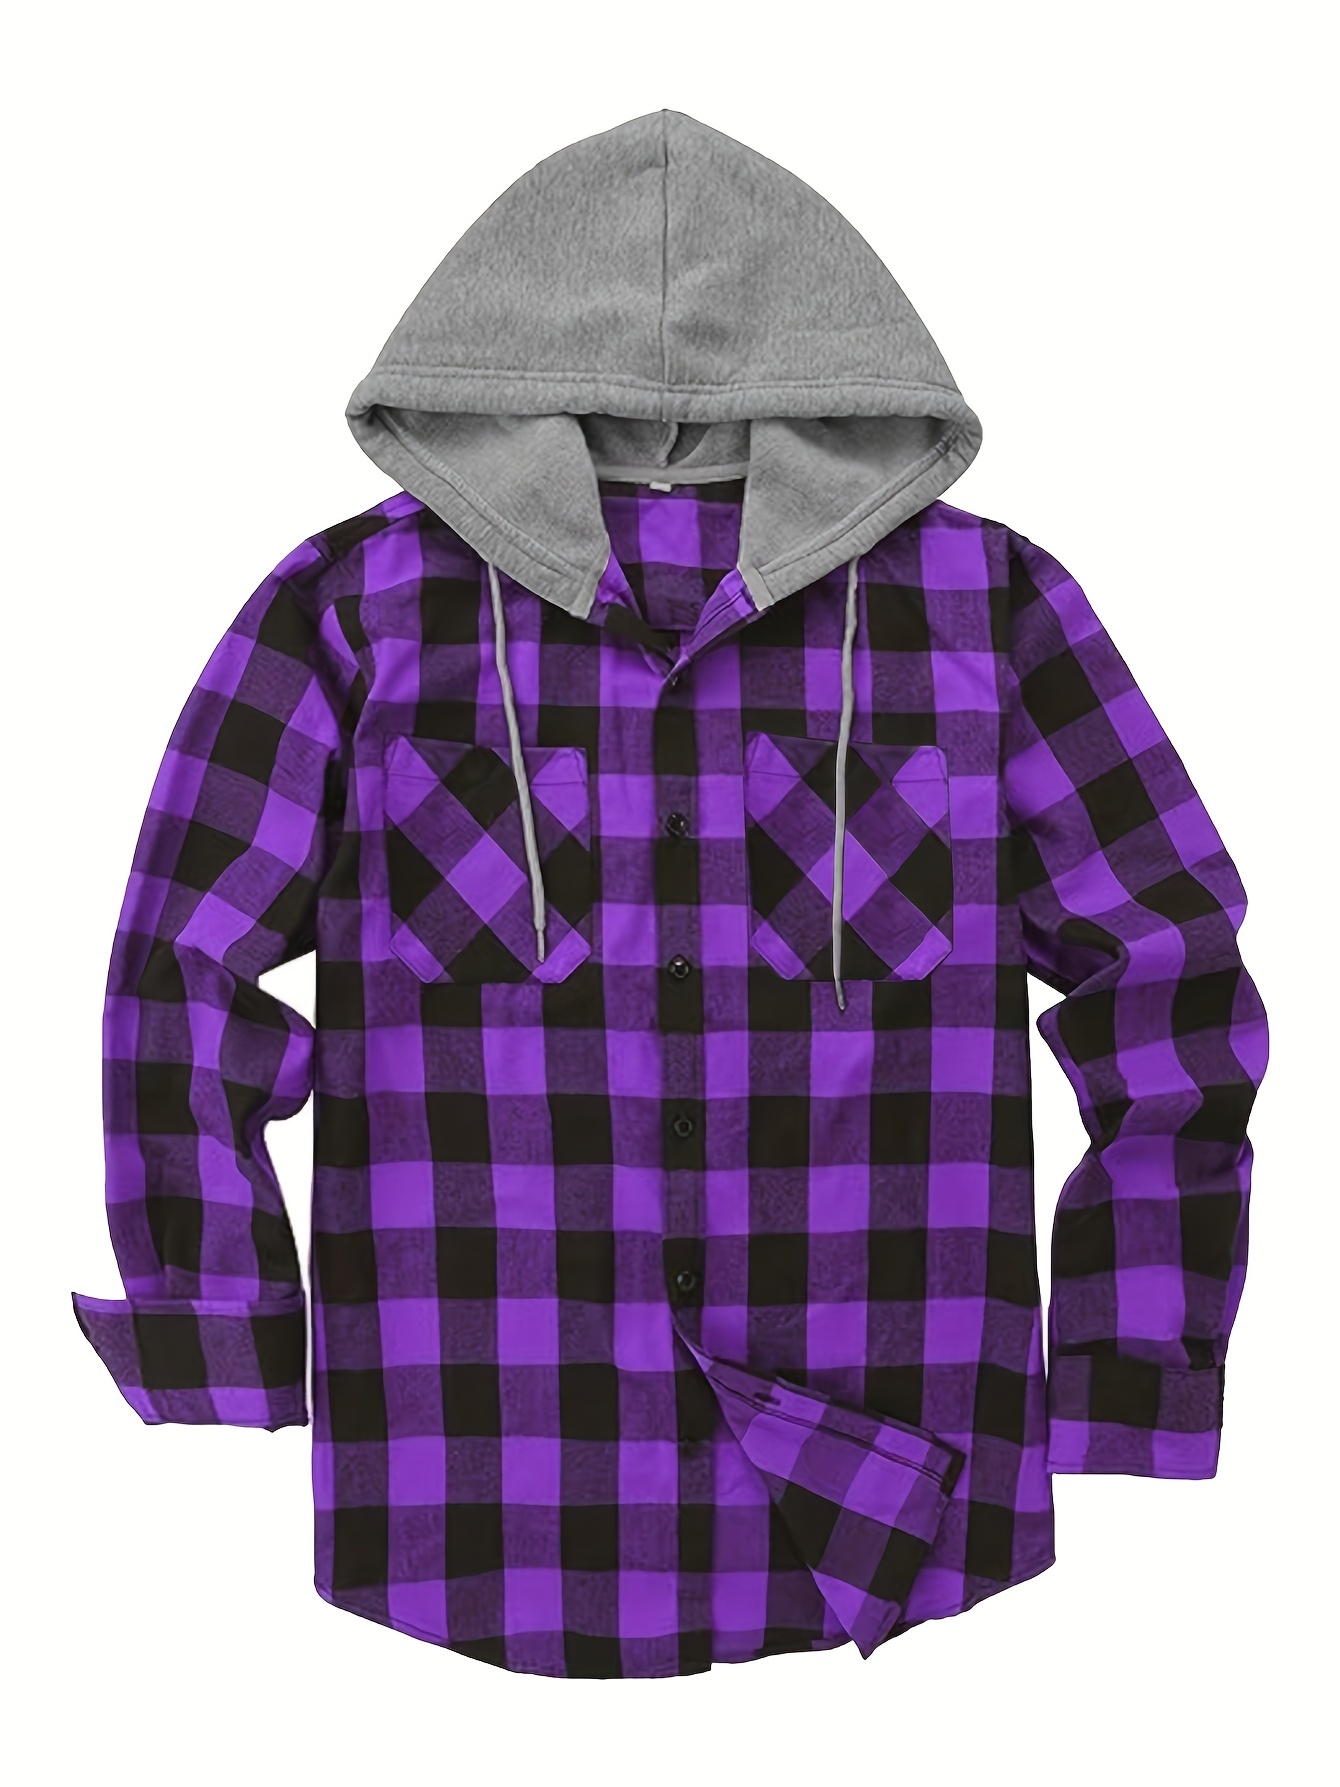 long sleeve casual regular fit button up hooded shirts jacket plaid shirt coat for men details 27